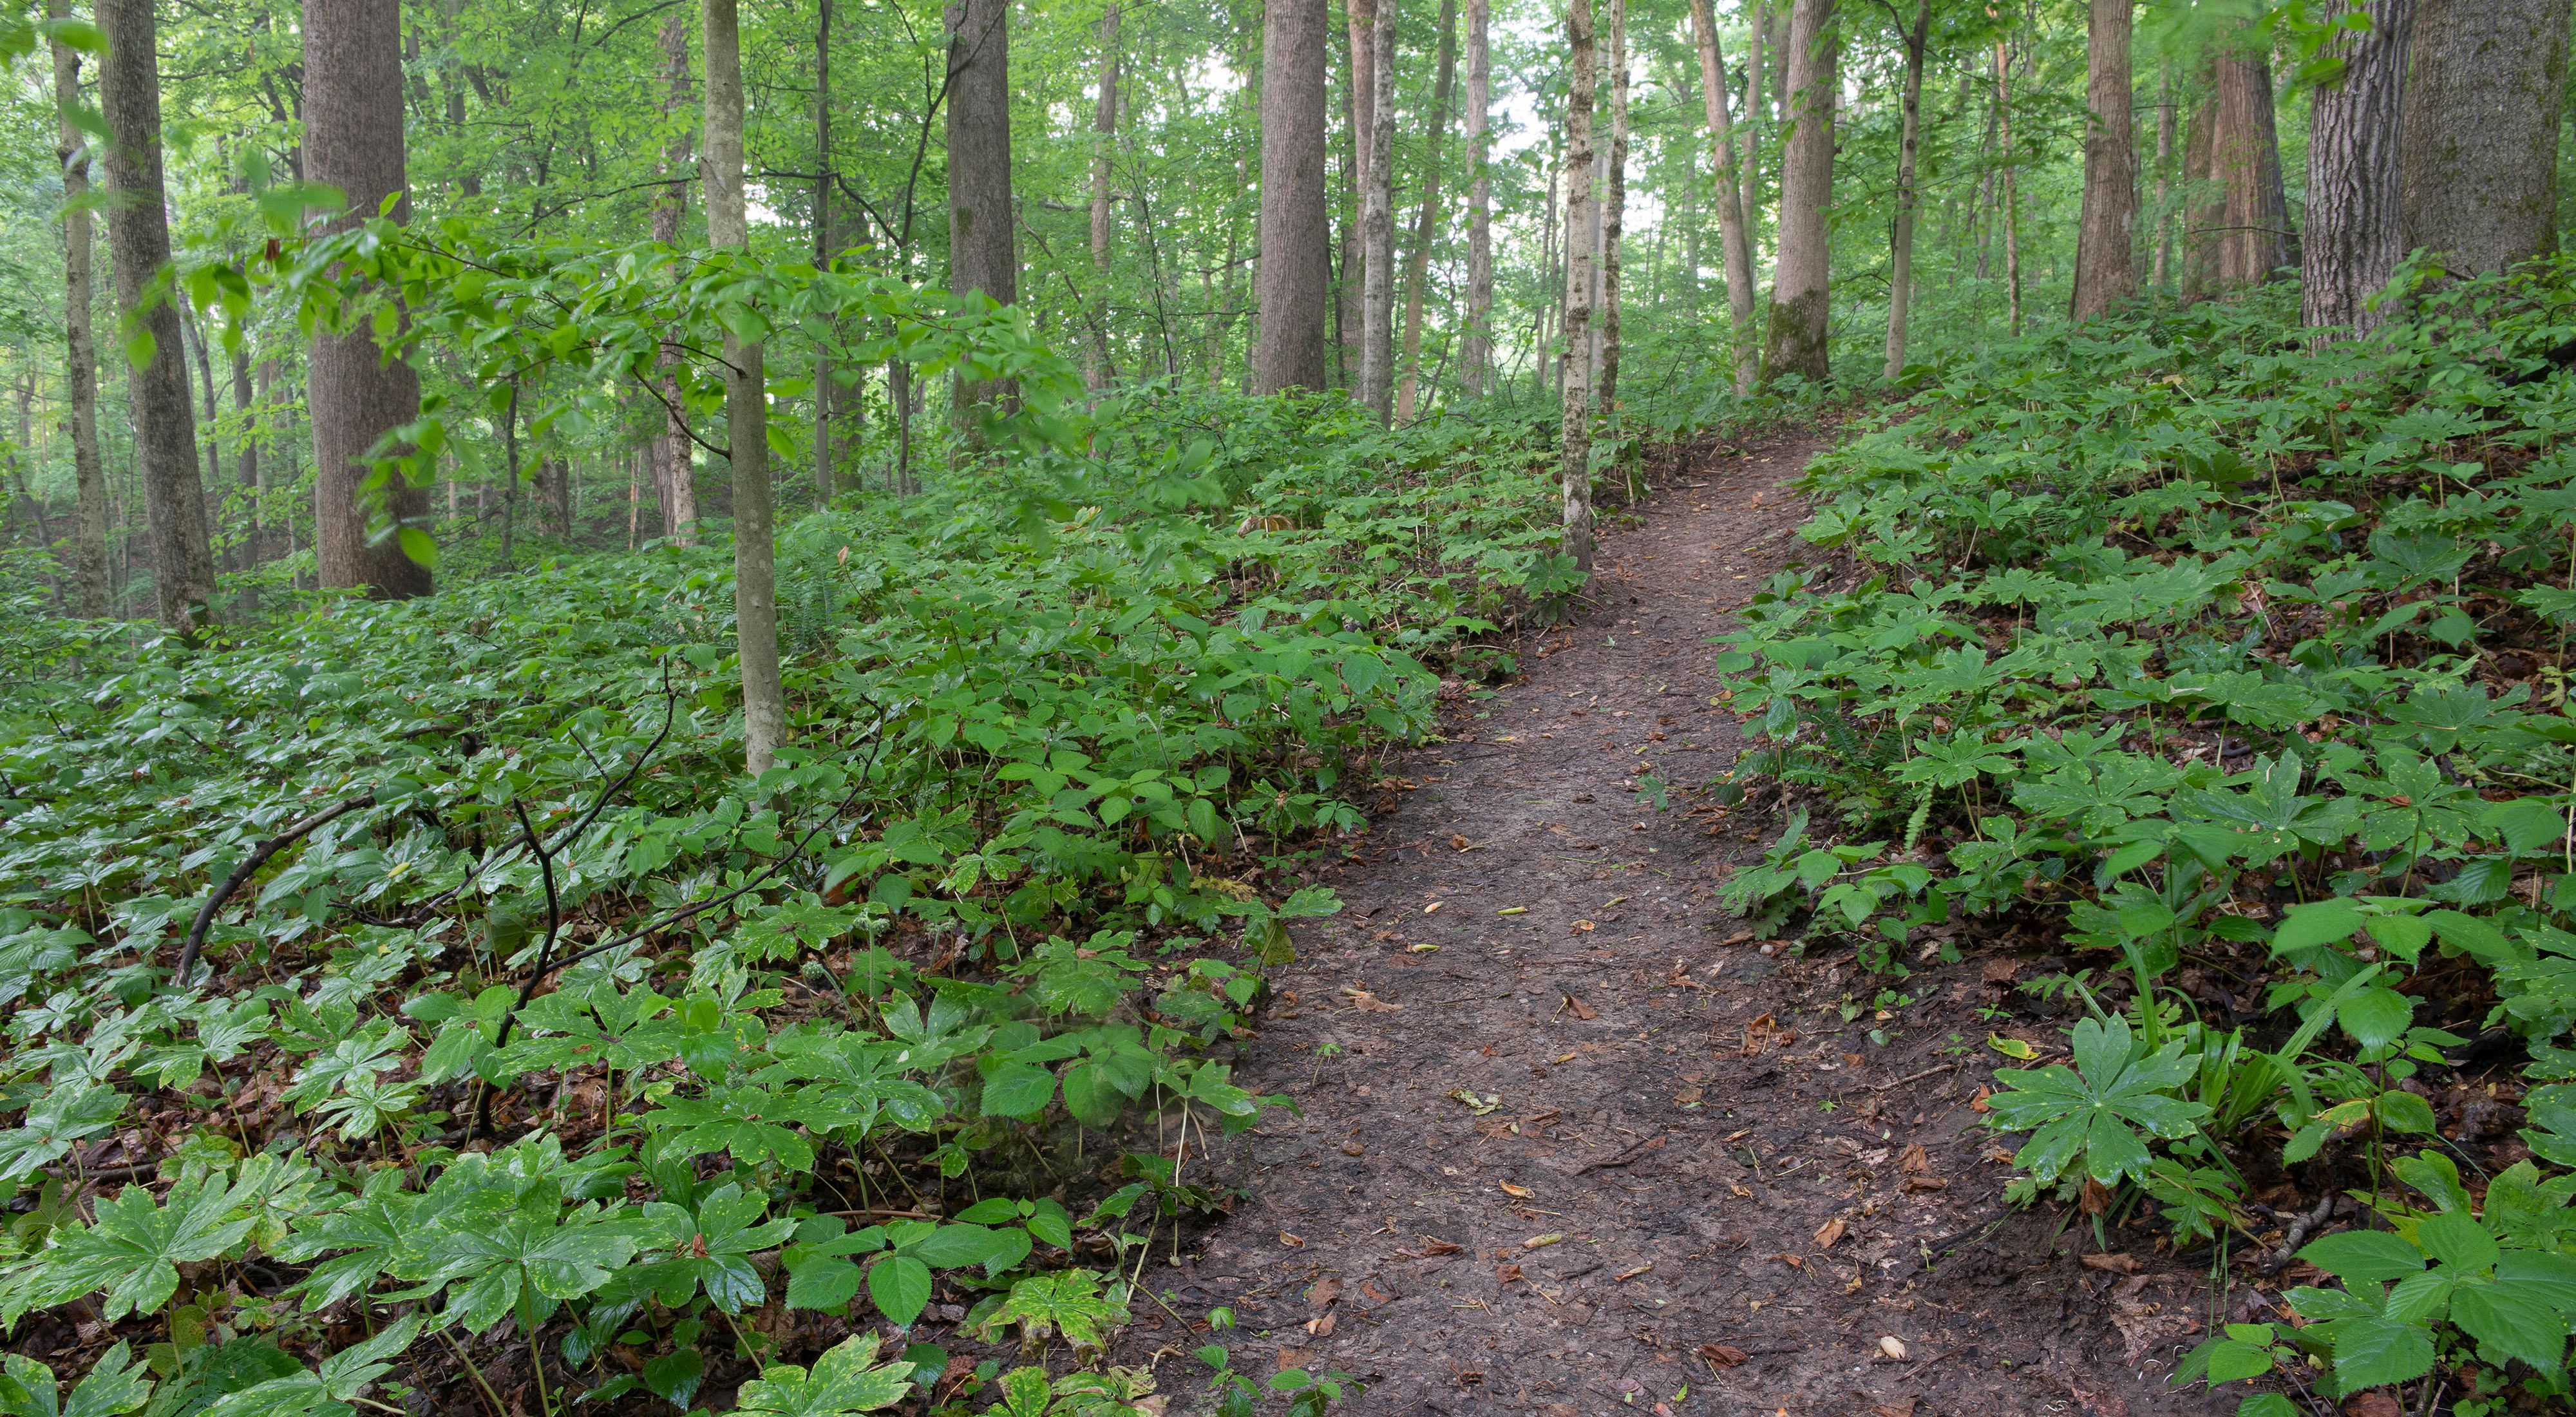 Walking path running through forest at Green's Bluff nature preserve.